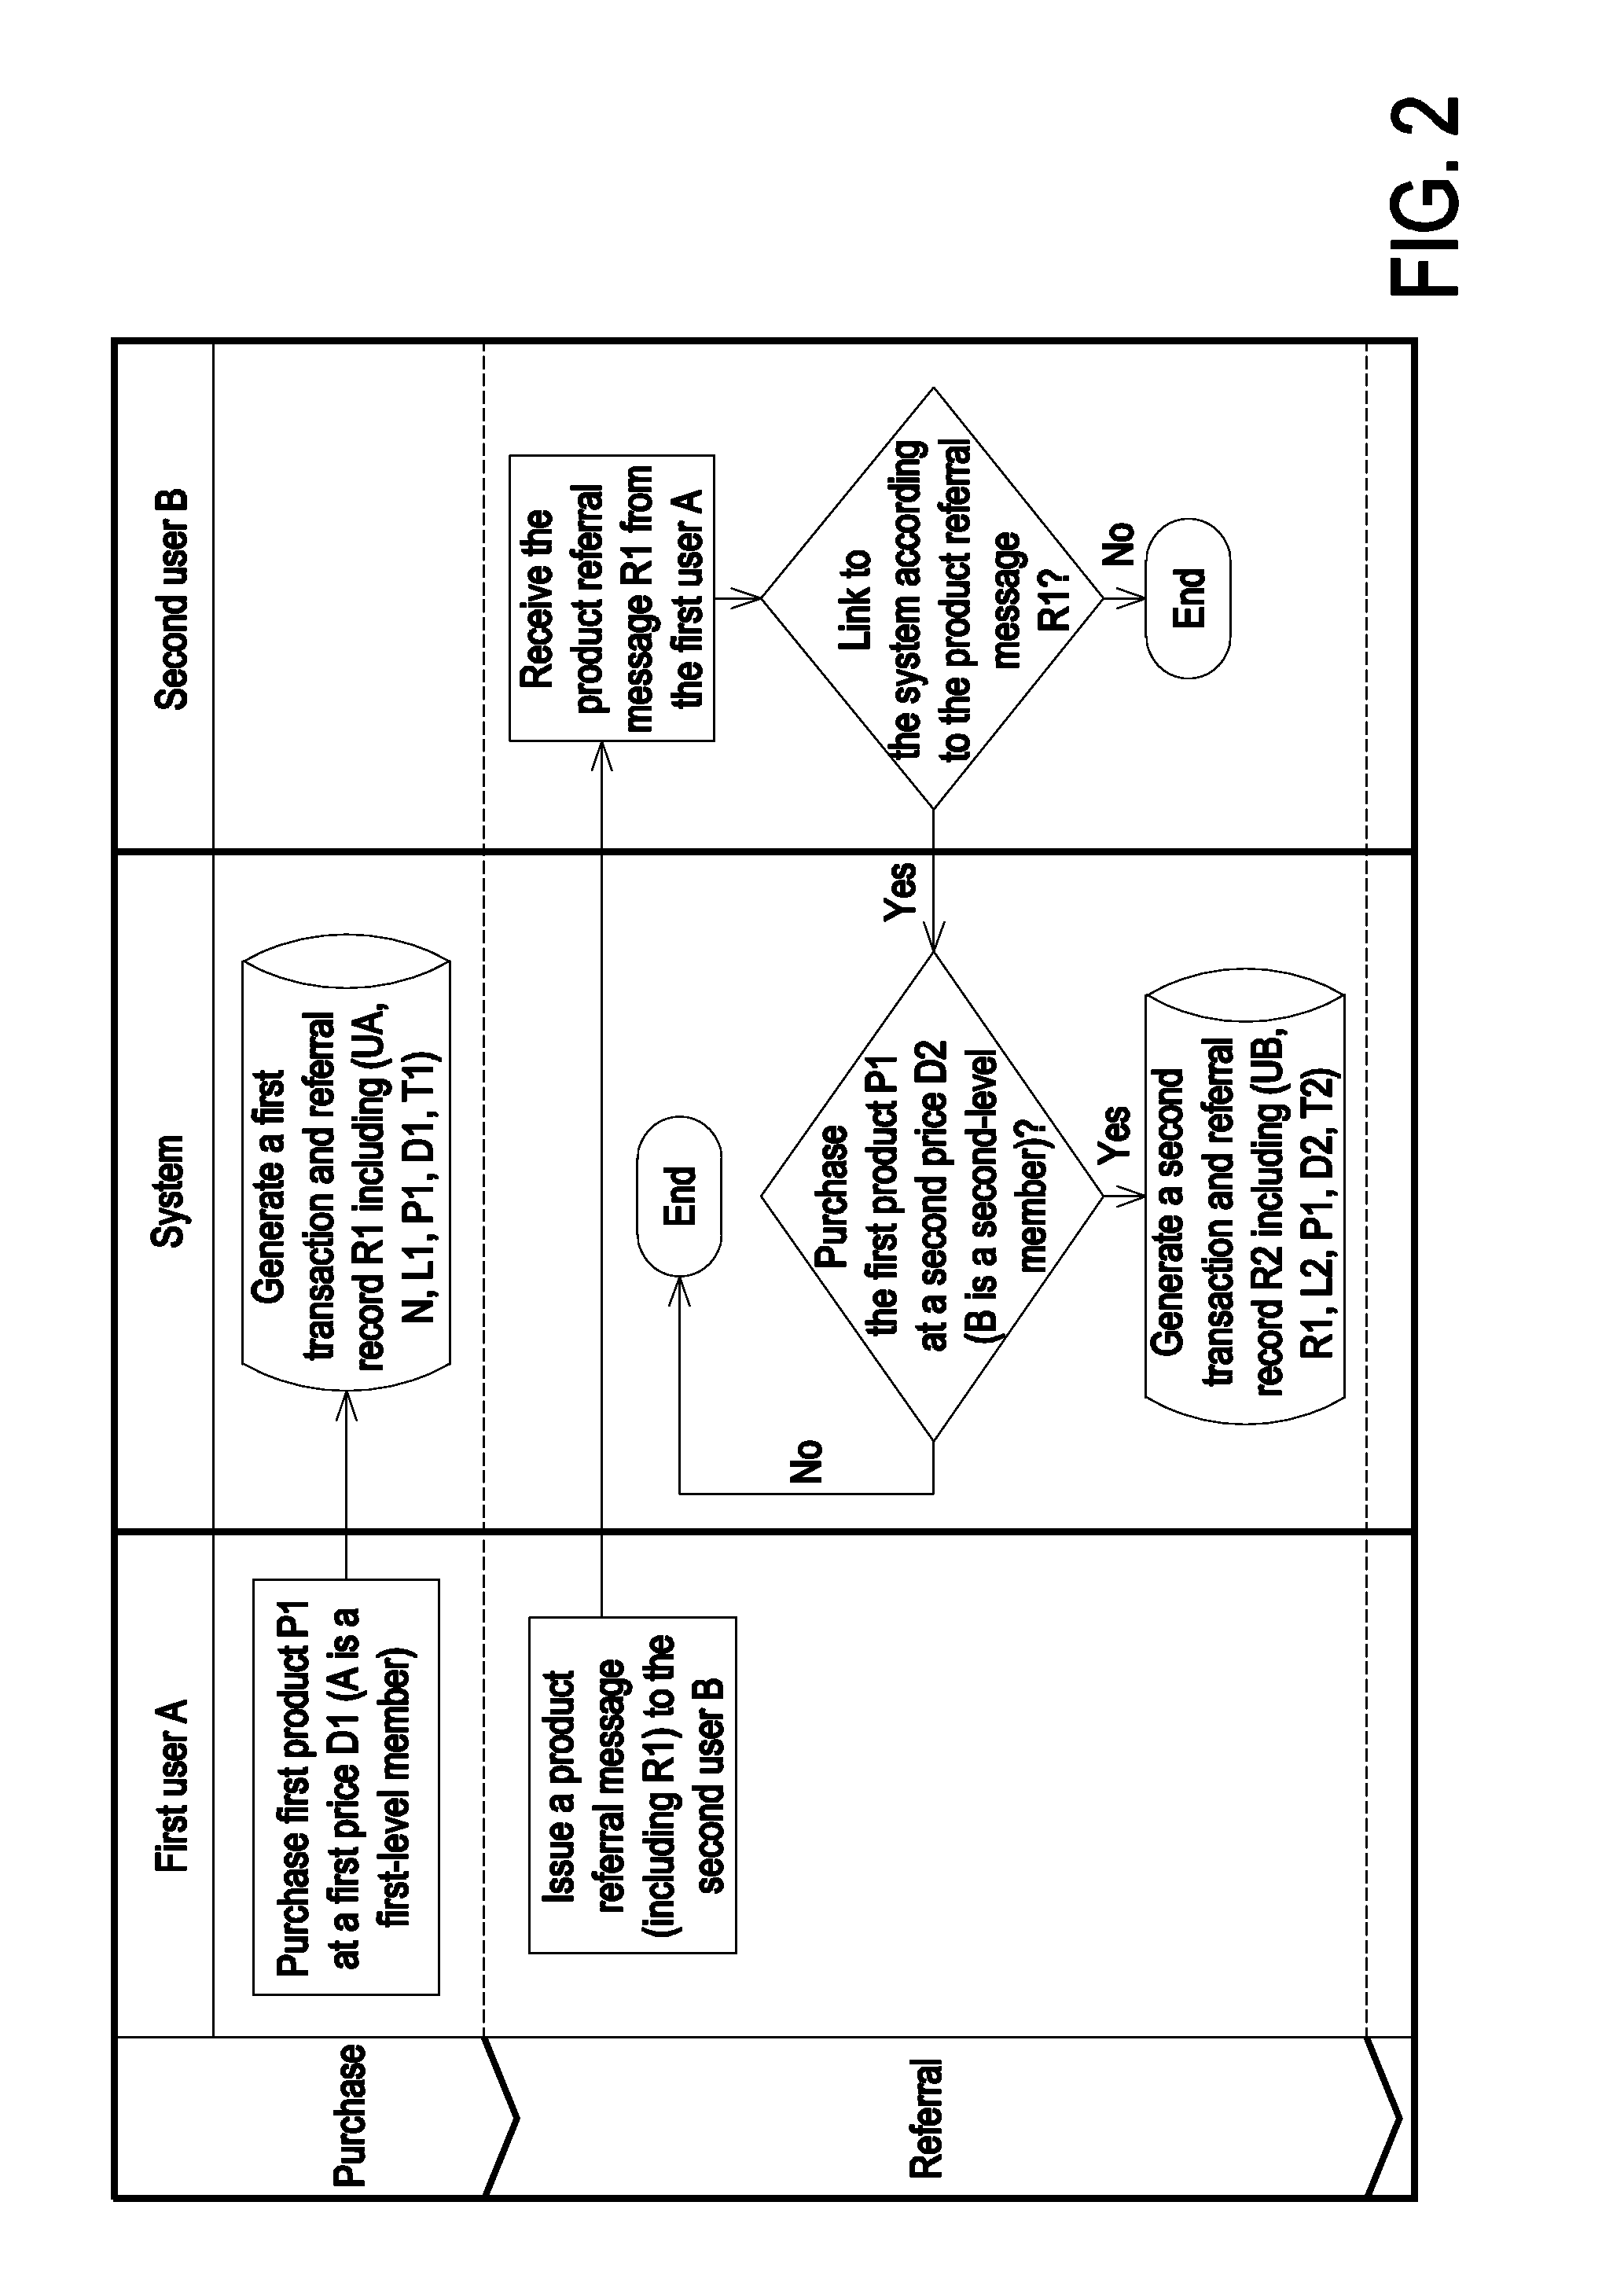 Dynamic multi-level network marketing system and method, and computer-readable recording medium